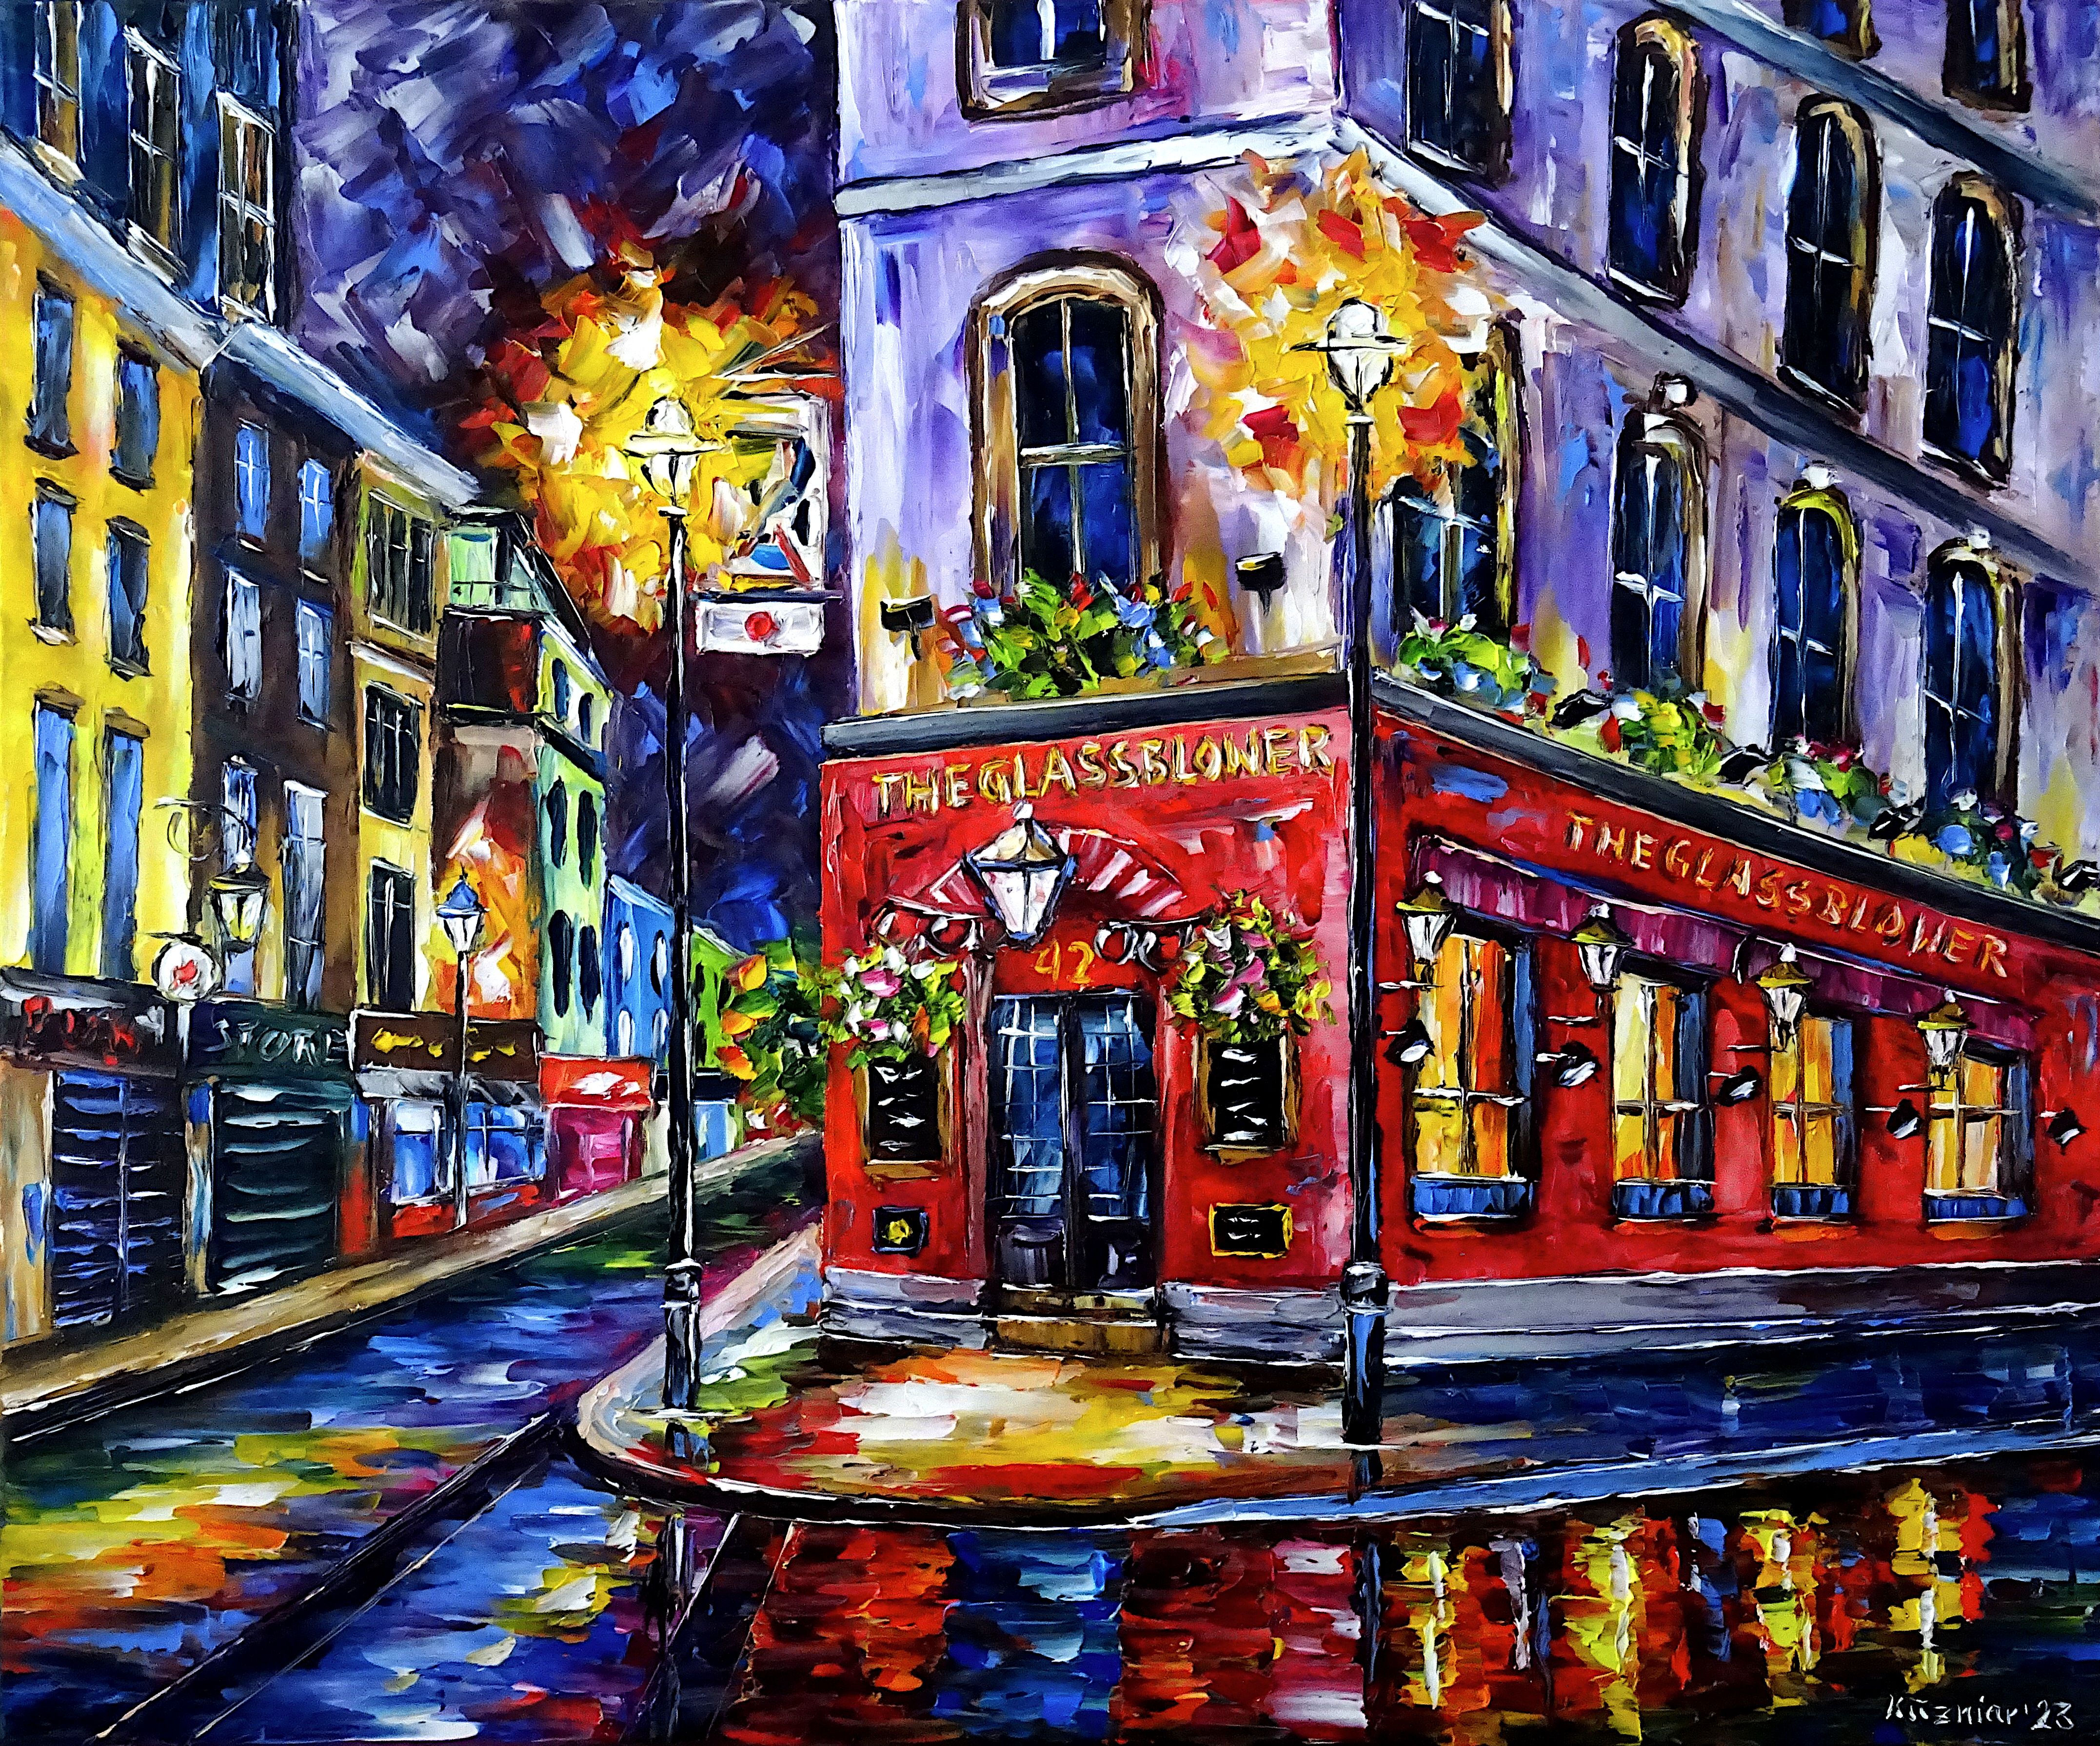 london at night,london night scenery,london night mood,pub in london,pub at night,the glassblower at night,london street lights,glowing street lights,street lights at night,london pub,london bar,illuminating streets,night sky,the glassblower painting,pub on the corner,bar on the corner,night in london,london city scene,london city painting,beautiful london,london love,london lovers,i love london,london colorful,london abstract,london beauty,palette knife oil painting,modern art,impressionism,abstract painting,lively colors,colorful painting,bright colors,light reflections,impasto painting,figurative